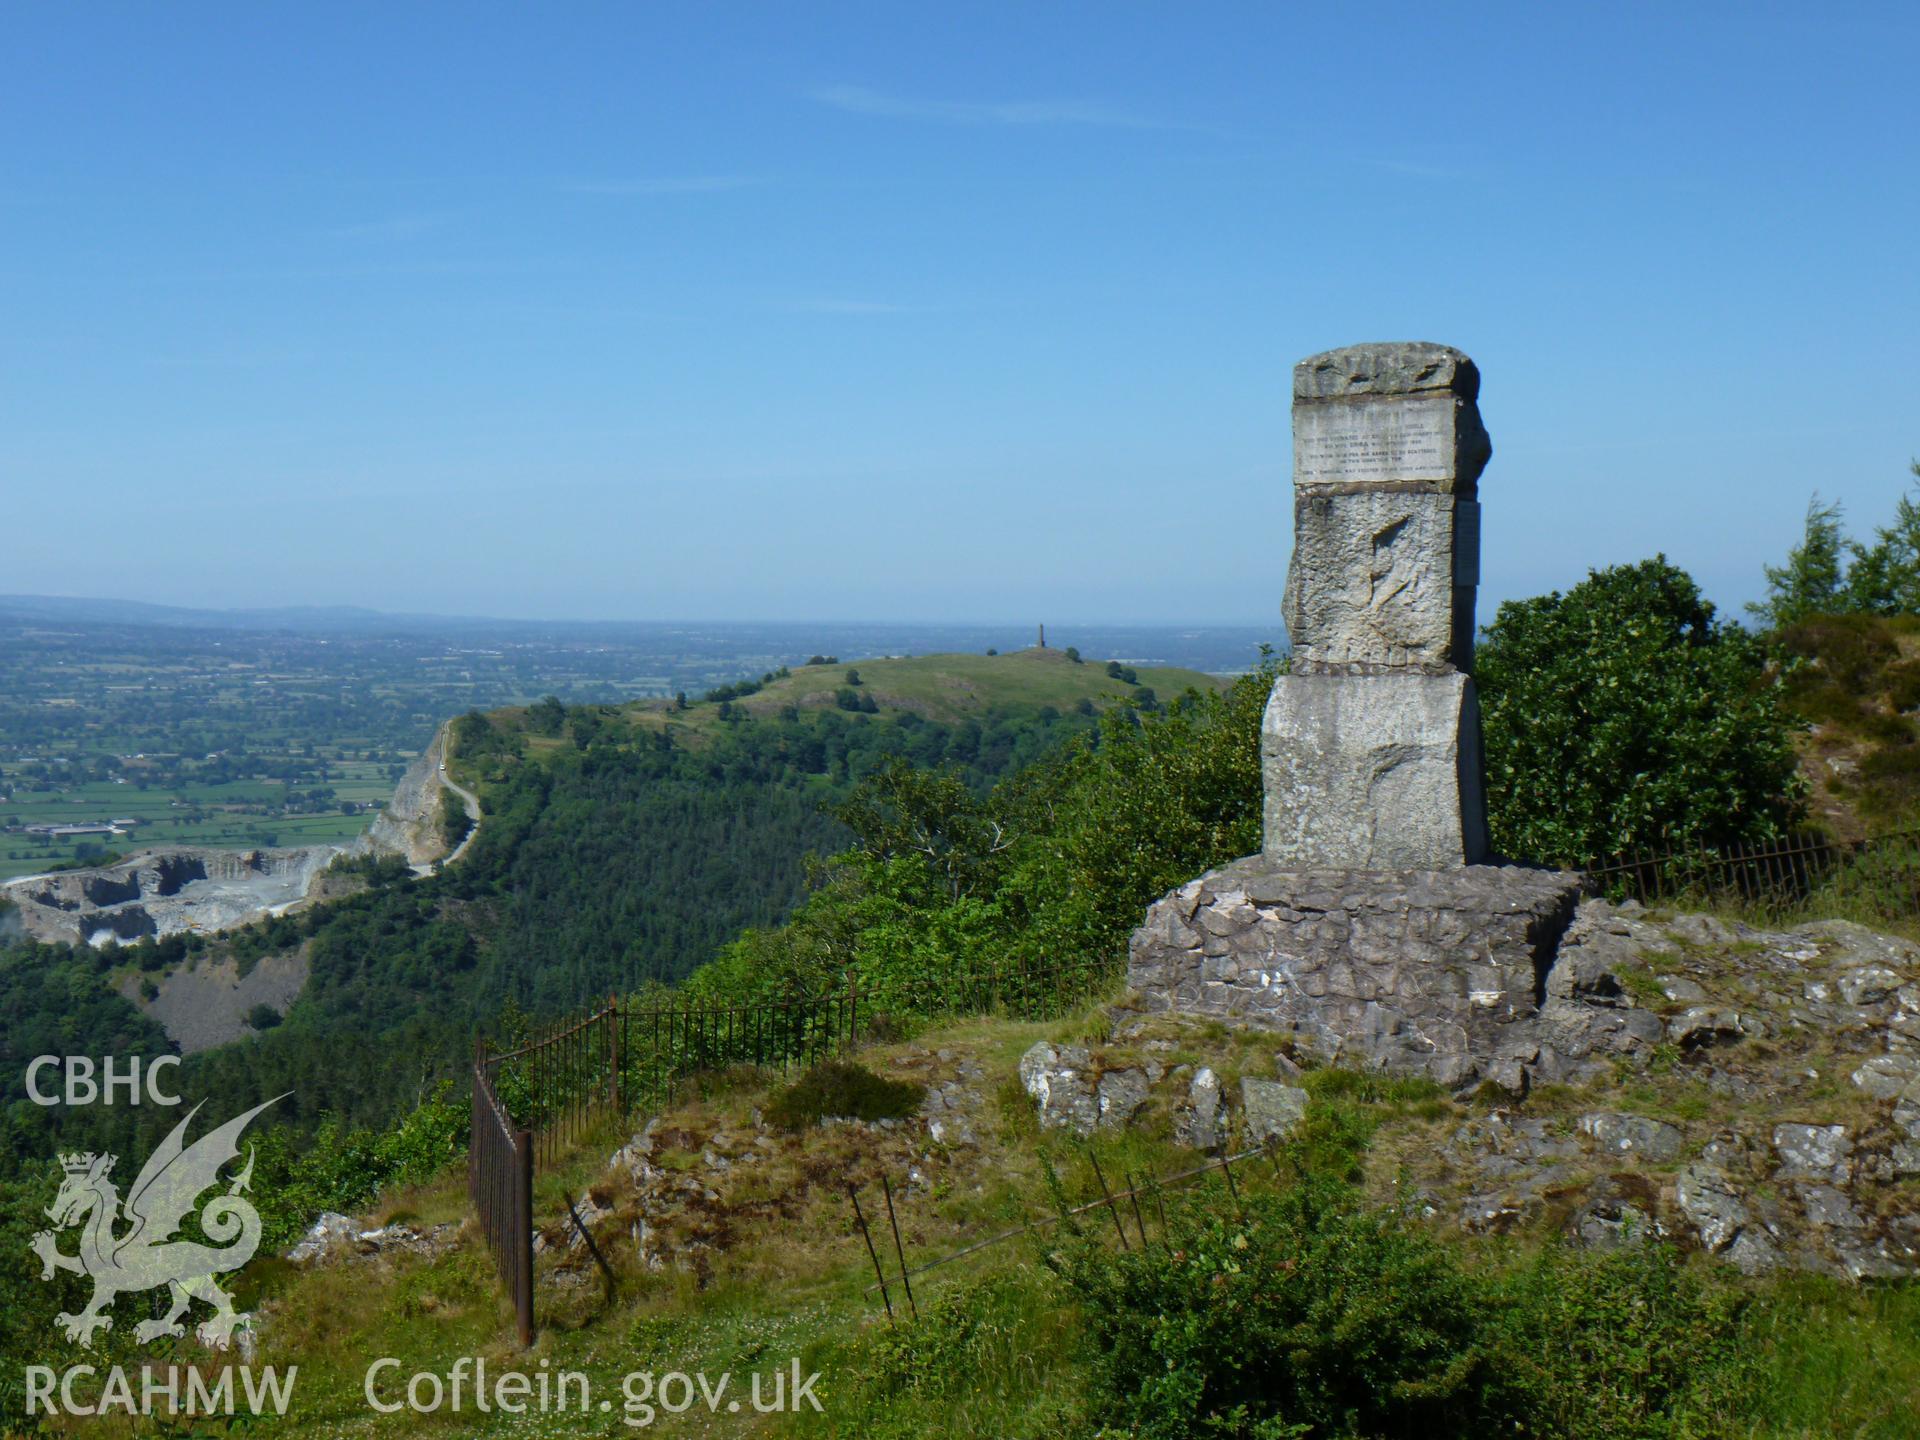 Photograph of the Romany monument to Ernest Burton looking towards the North with Criggion Quarry and Rodney's Pillar visible in the background.